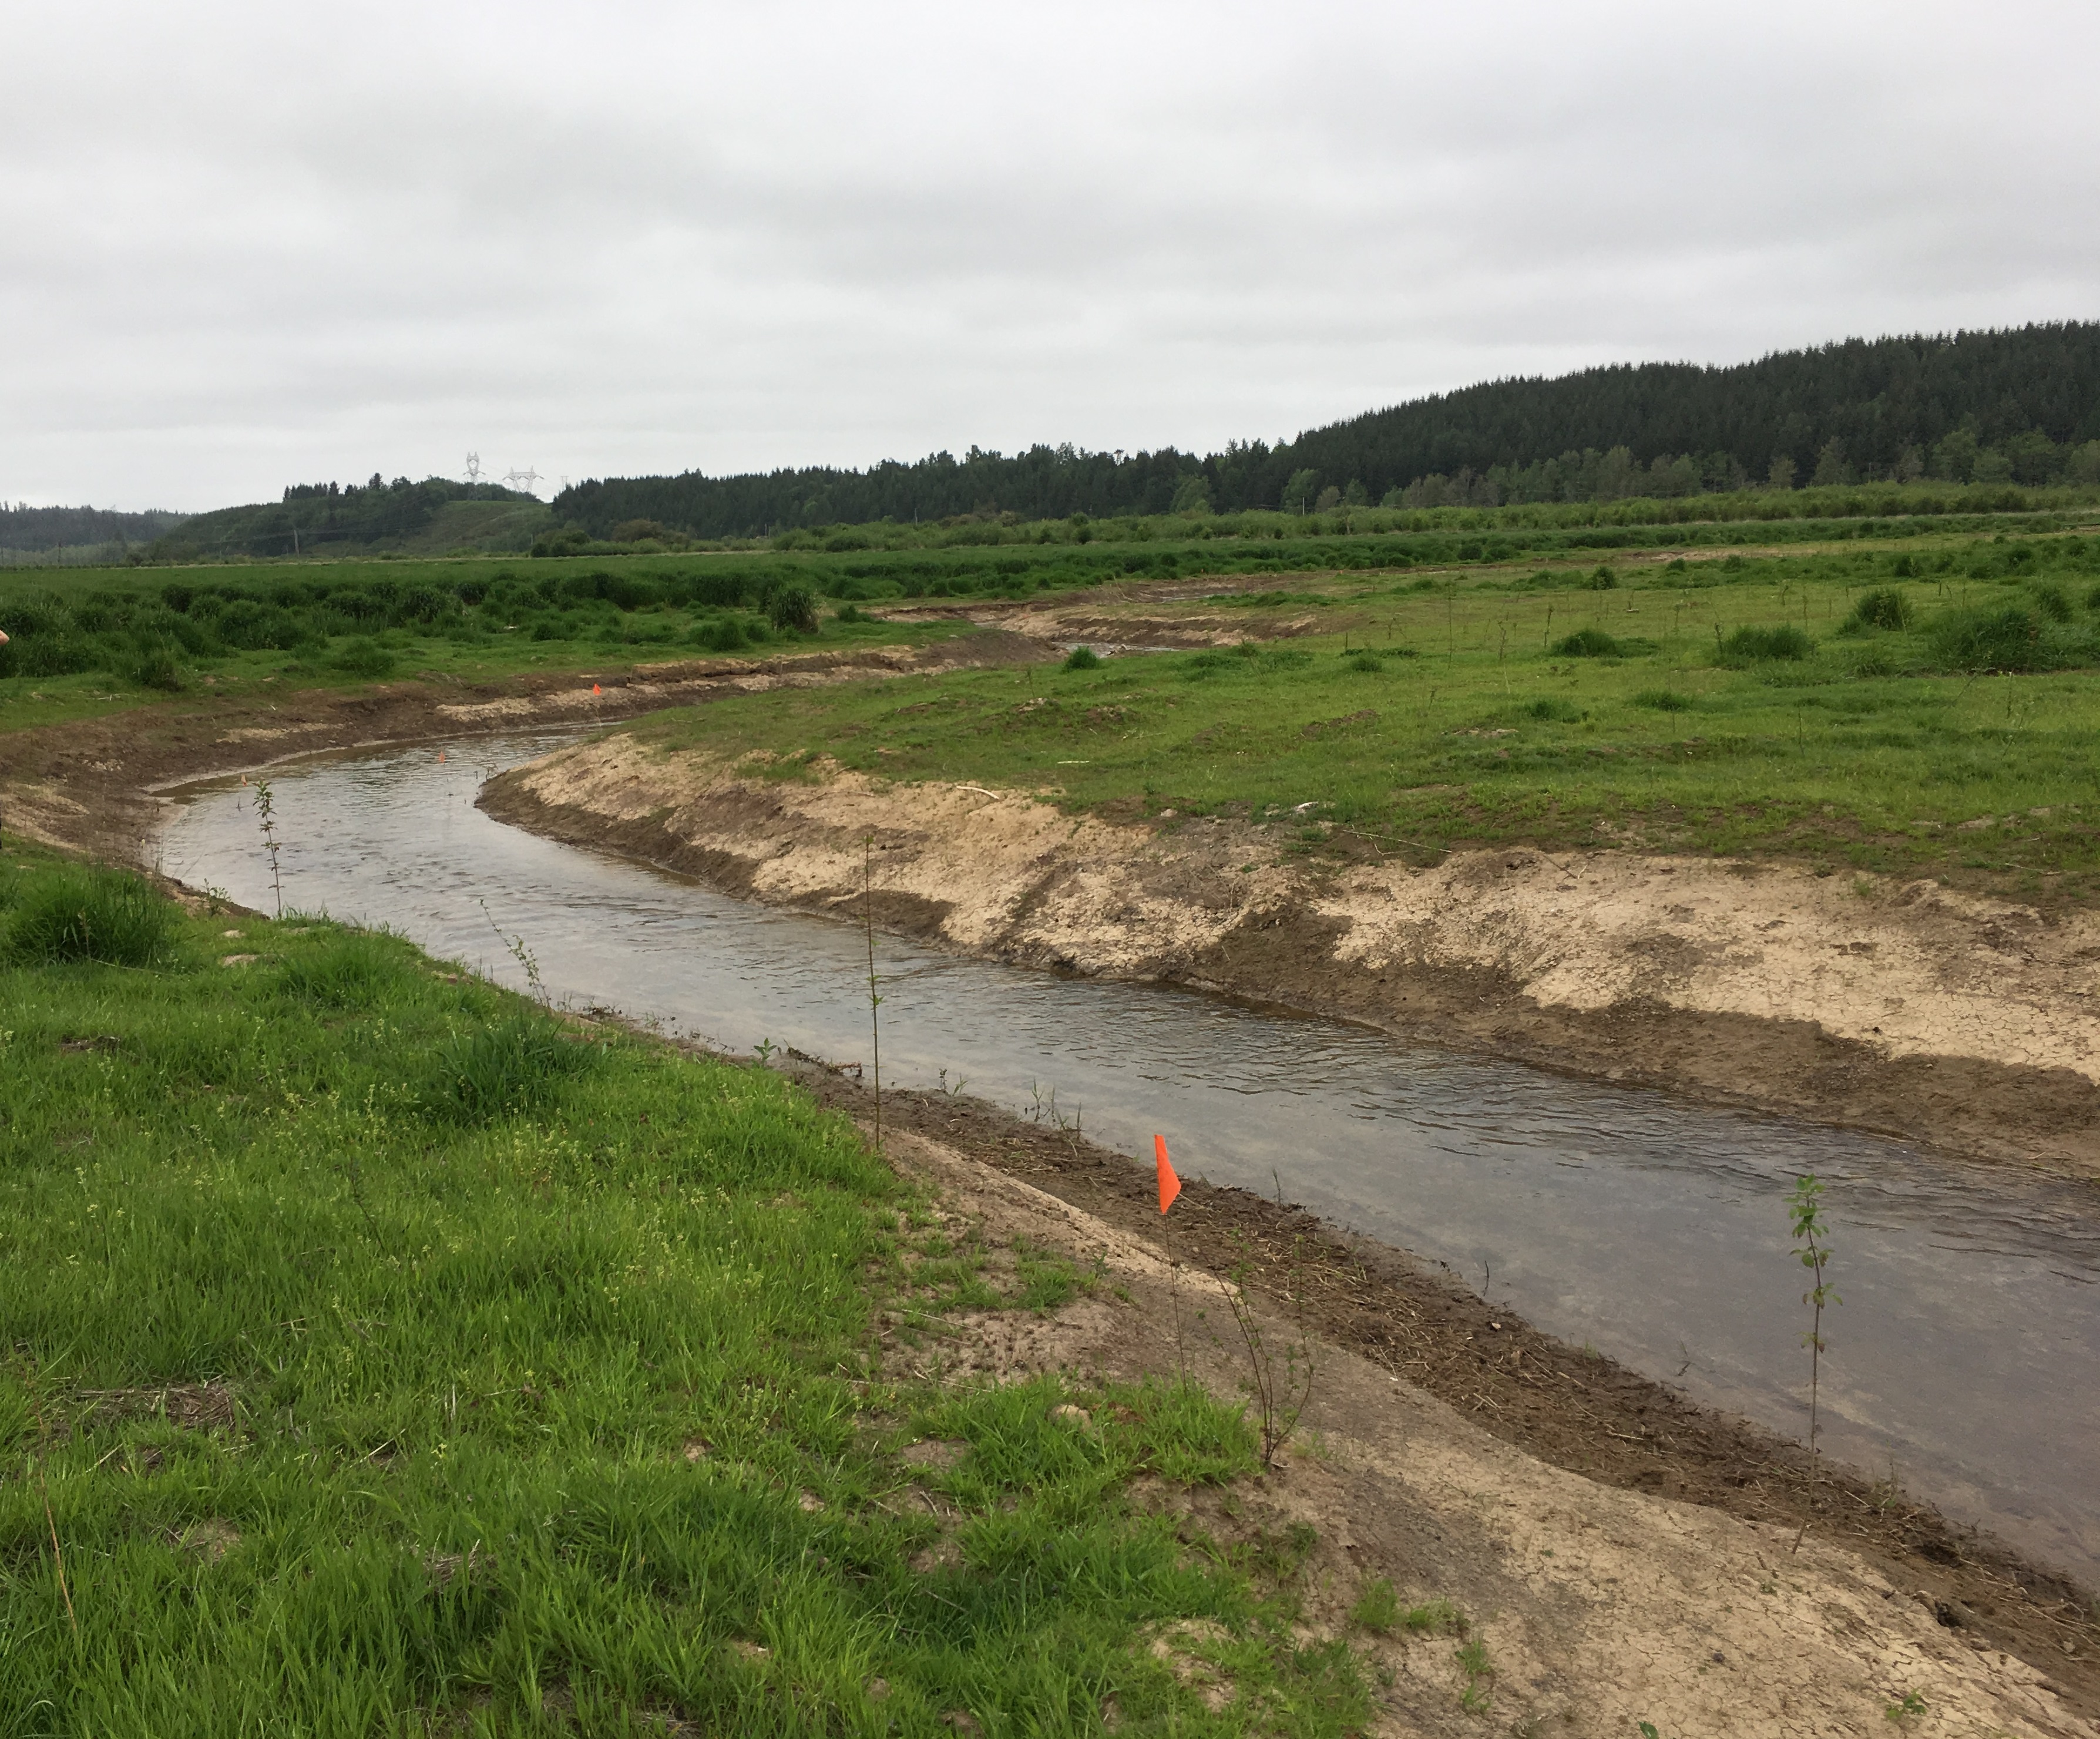 Wetland area containing grasses and meandering stream with flags at Chehalis Basin Bank site.